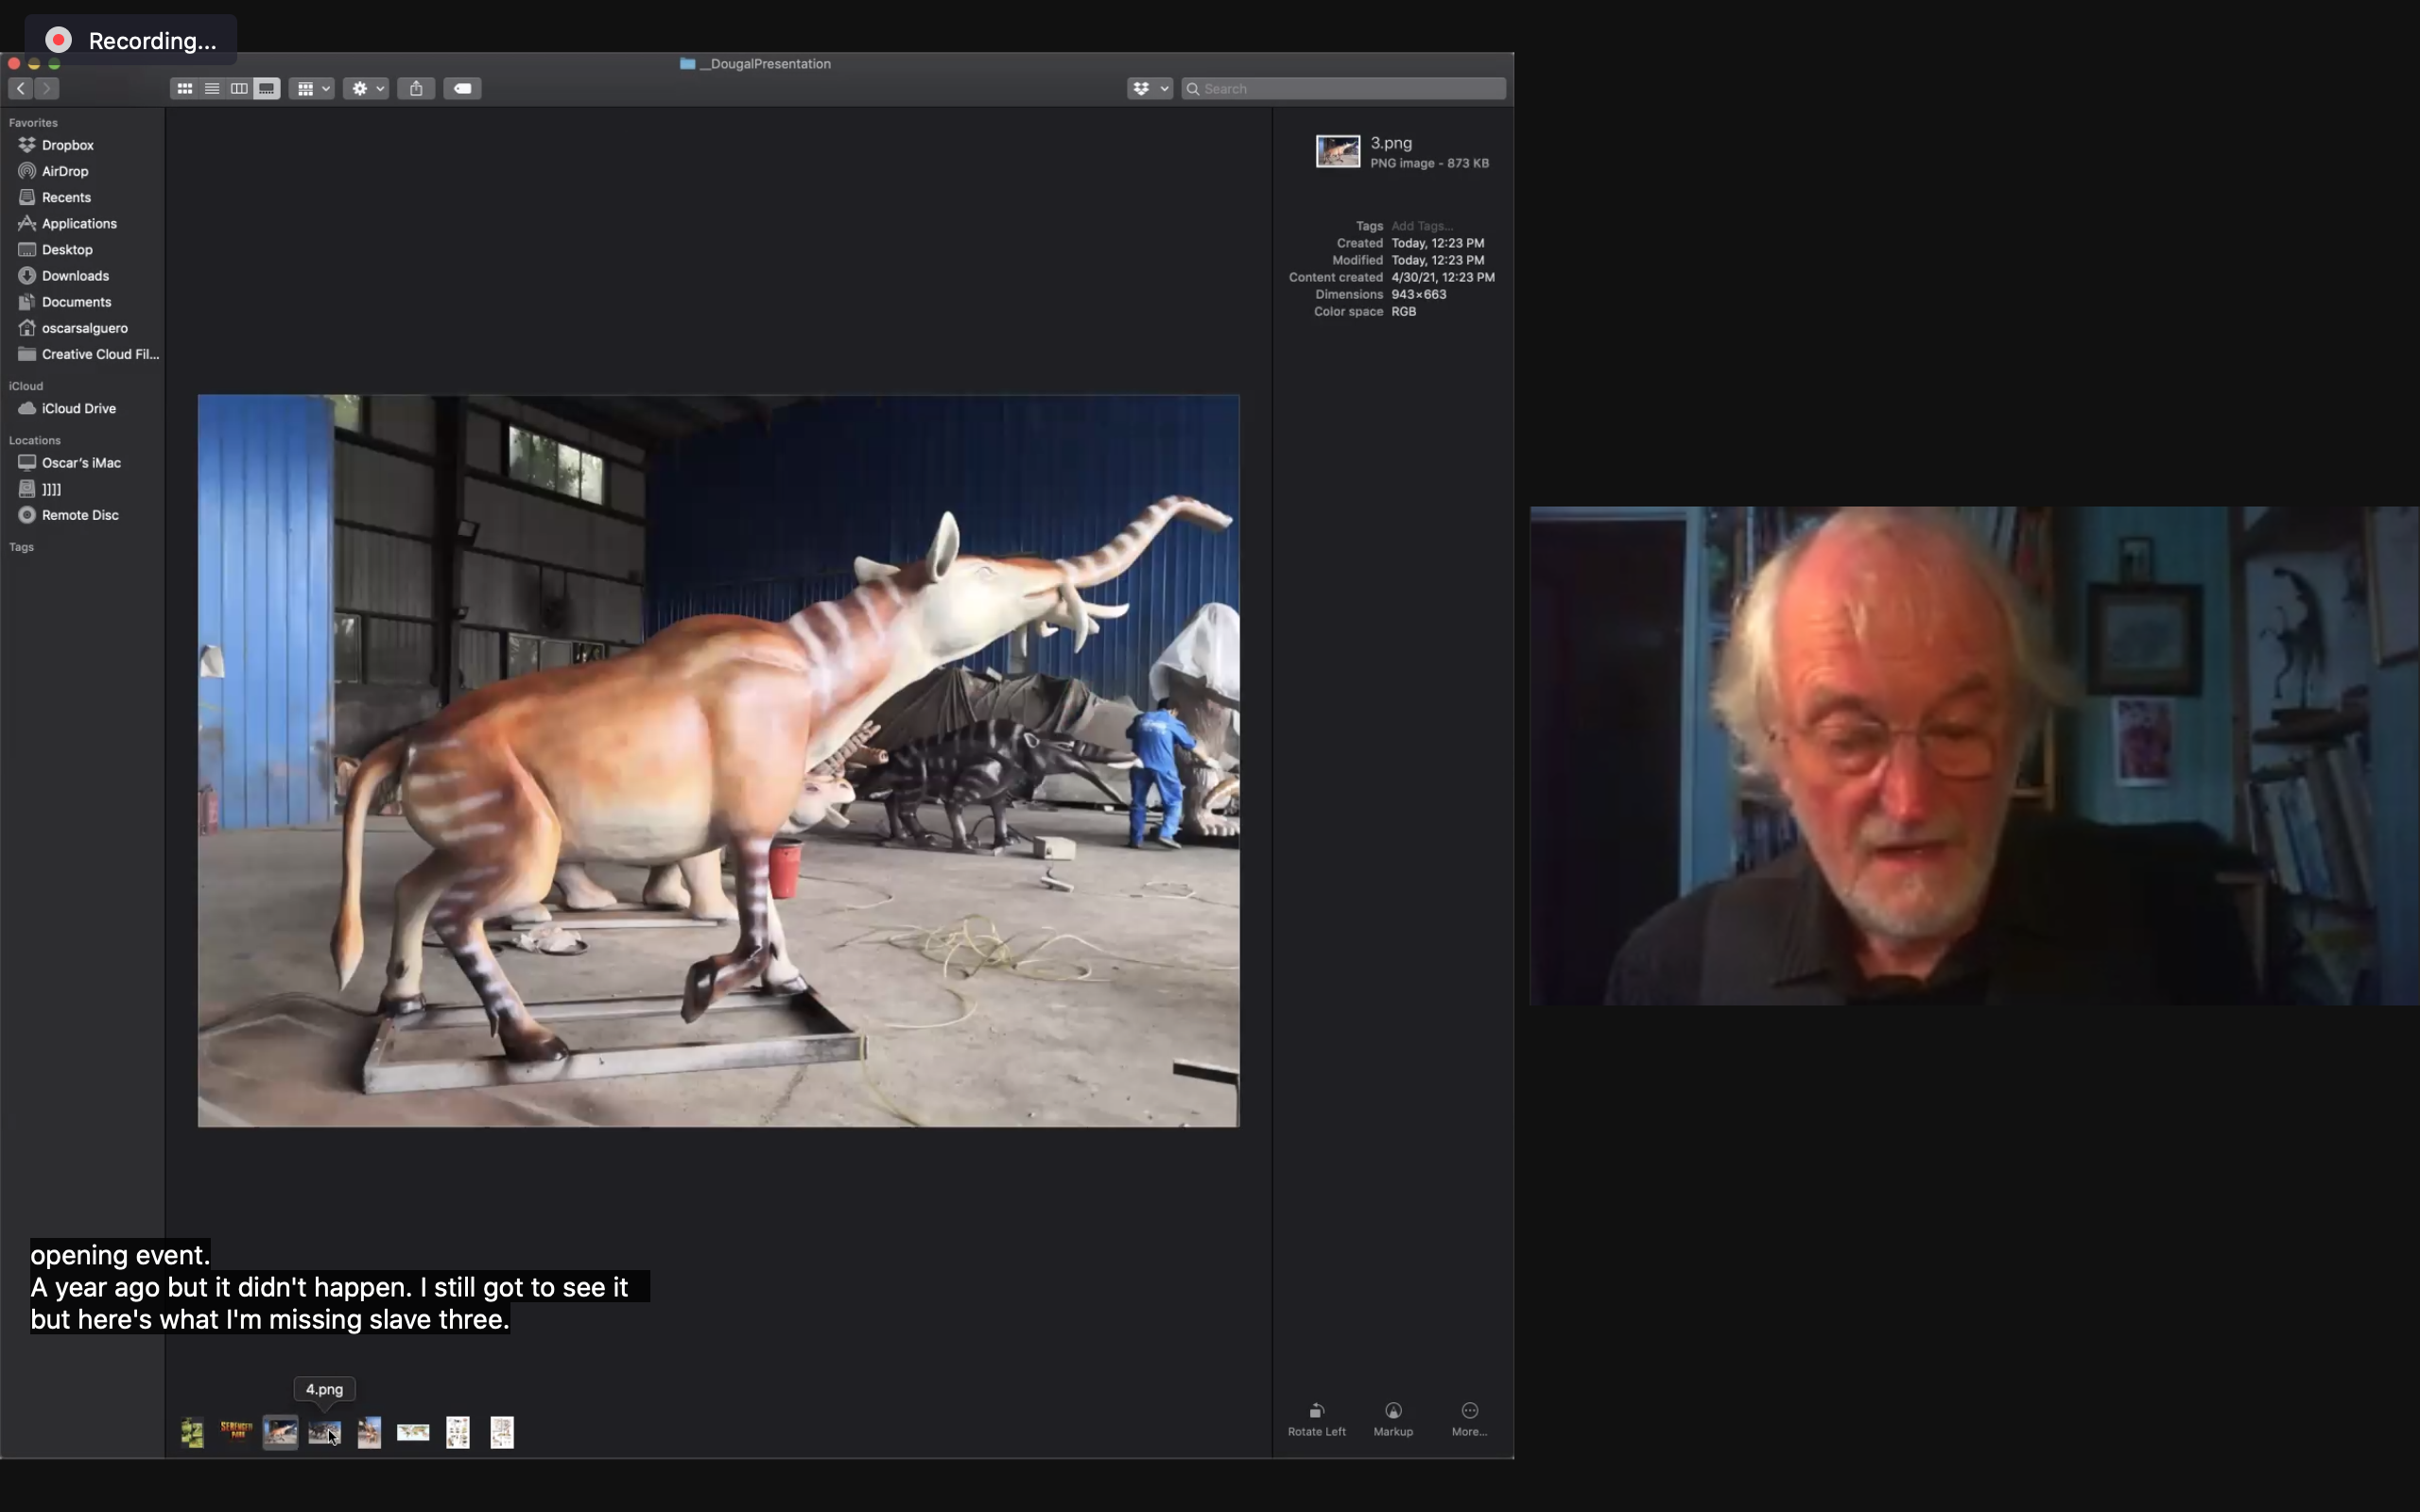 Screen Capture of Dougal Dixon and an image of a speculative species